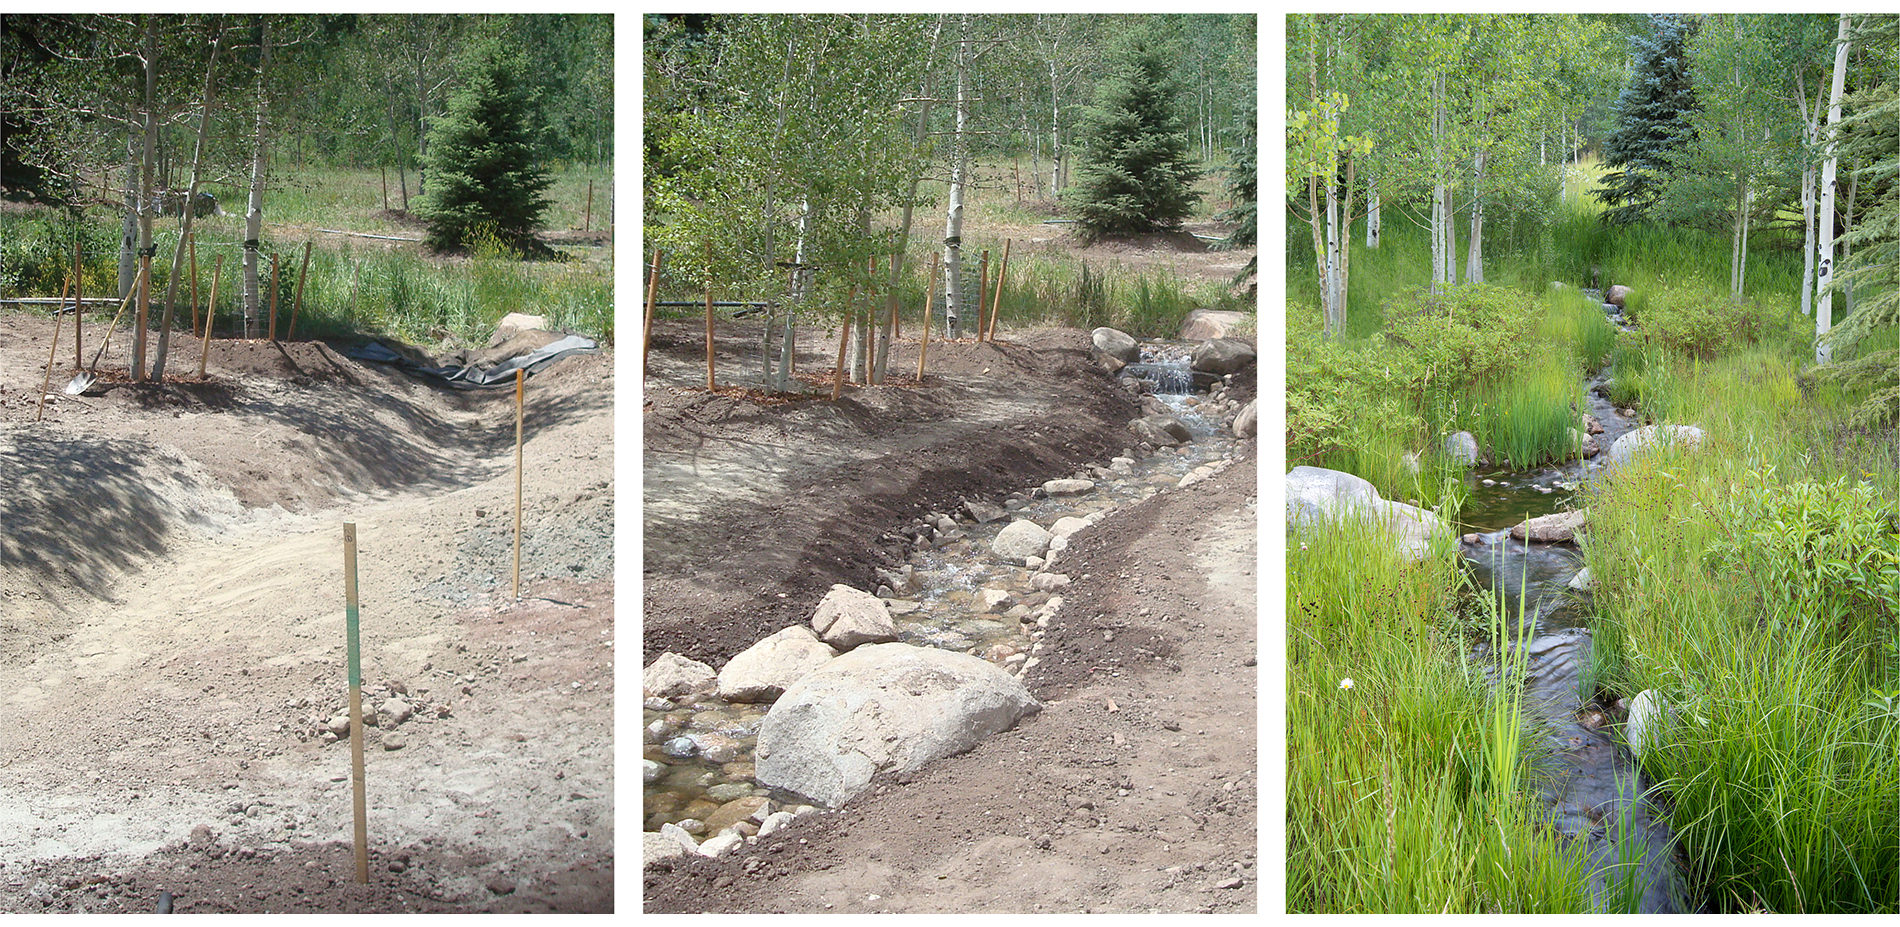 Naturalized Riparian Zone Before, During, and After Development